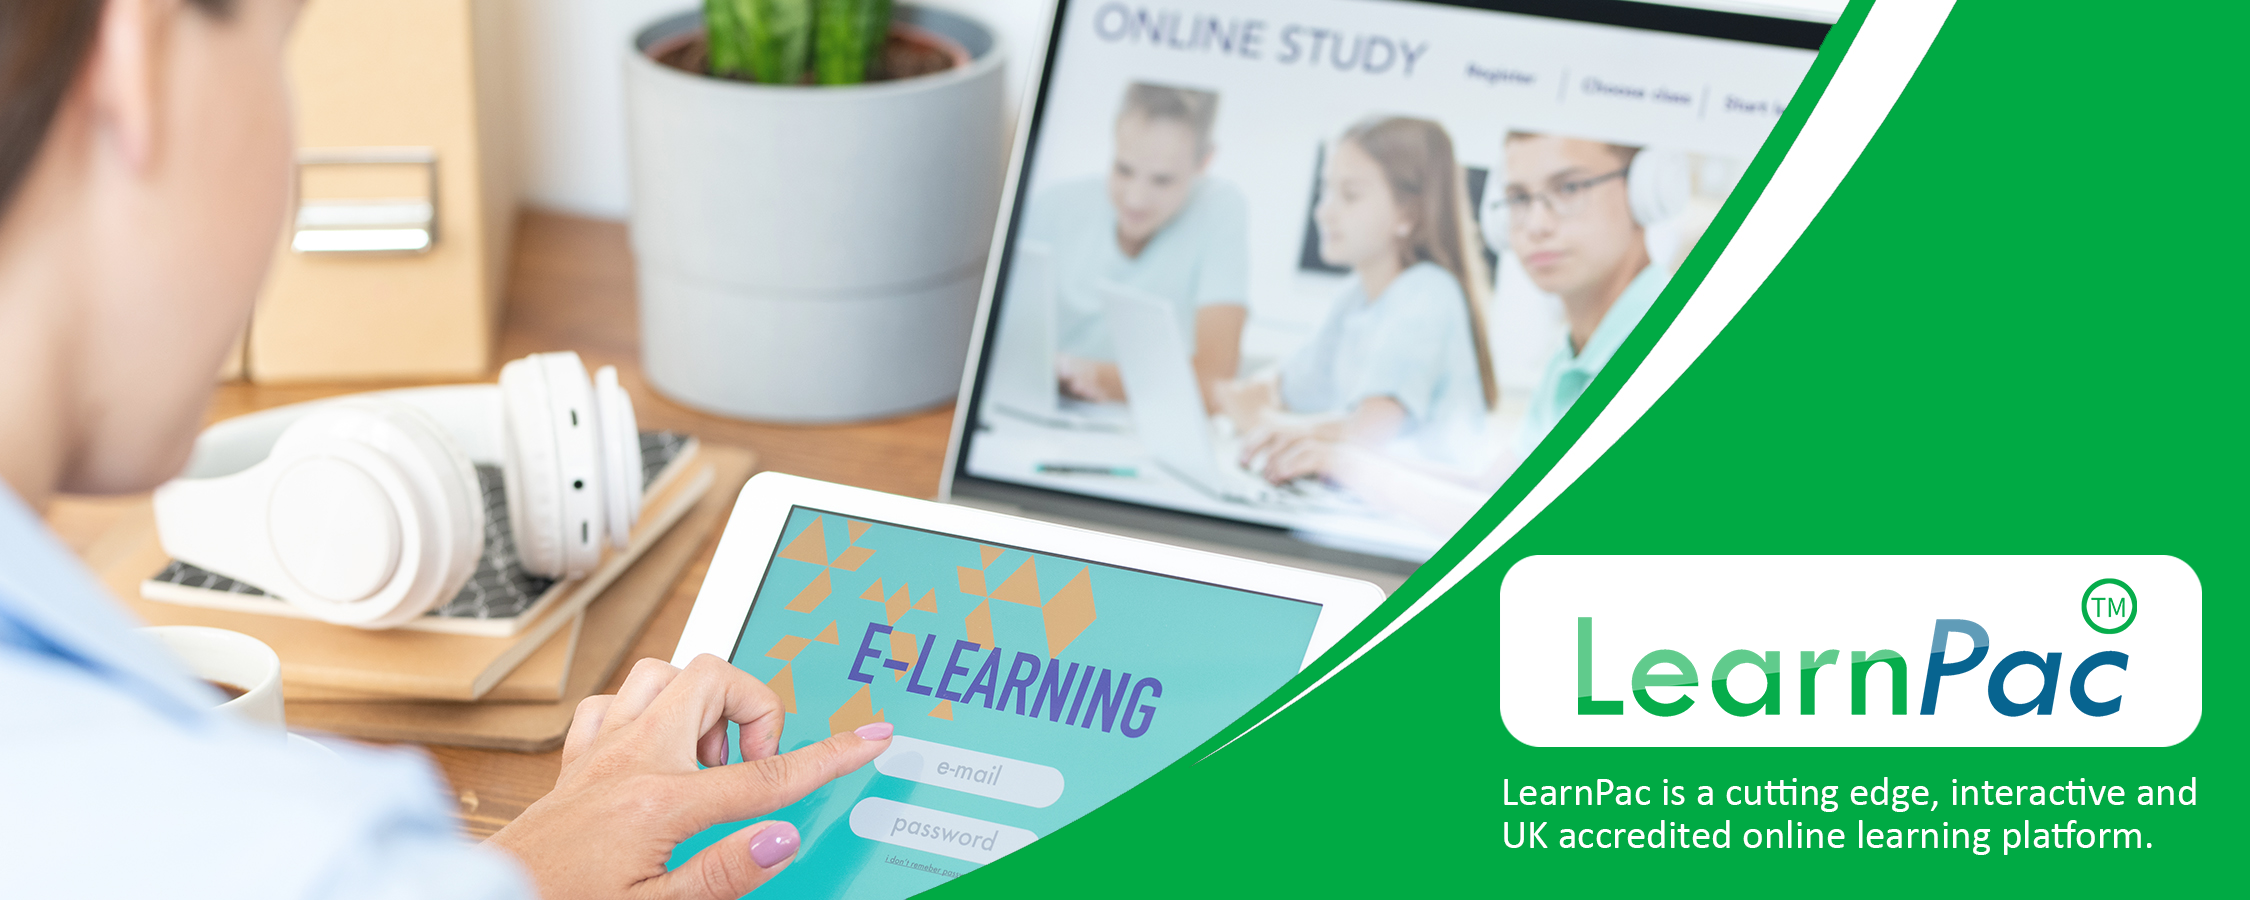 Managing an Outbreak of Infection in Care Homes - Online Learning Courses - E-Learning Courses - LearnPac Systems UK --